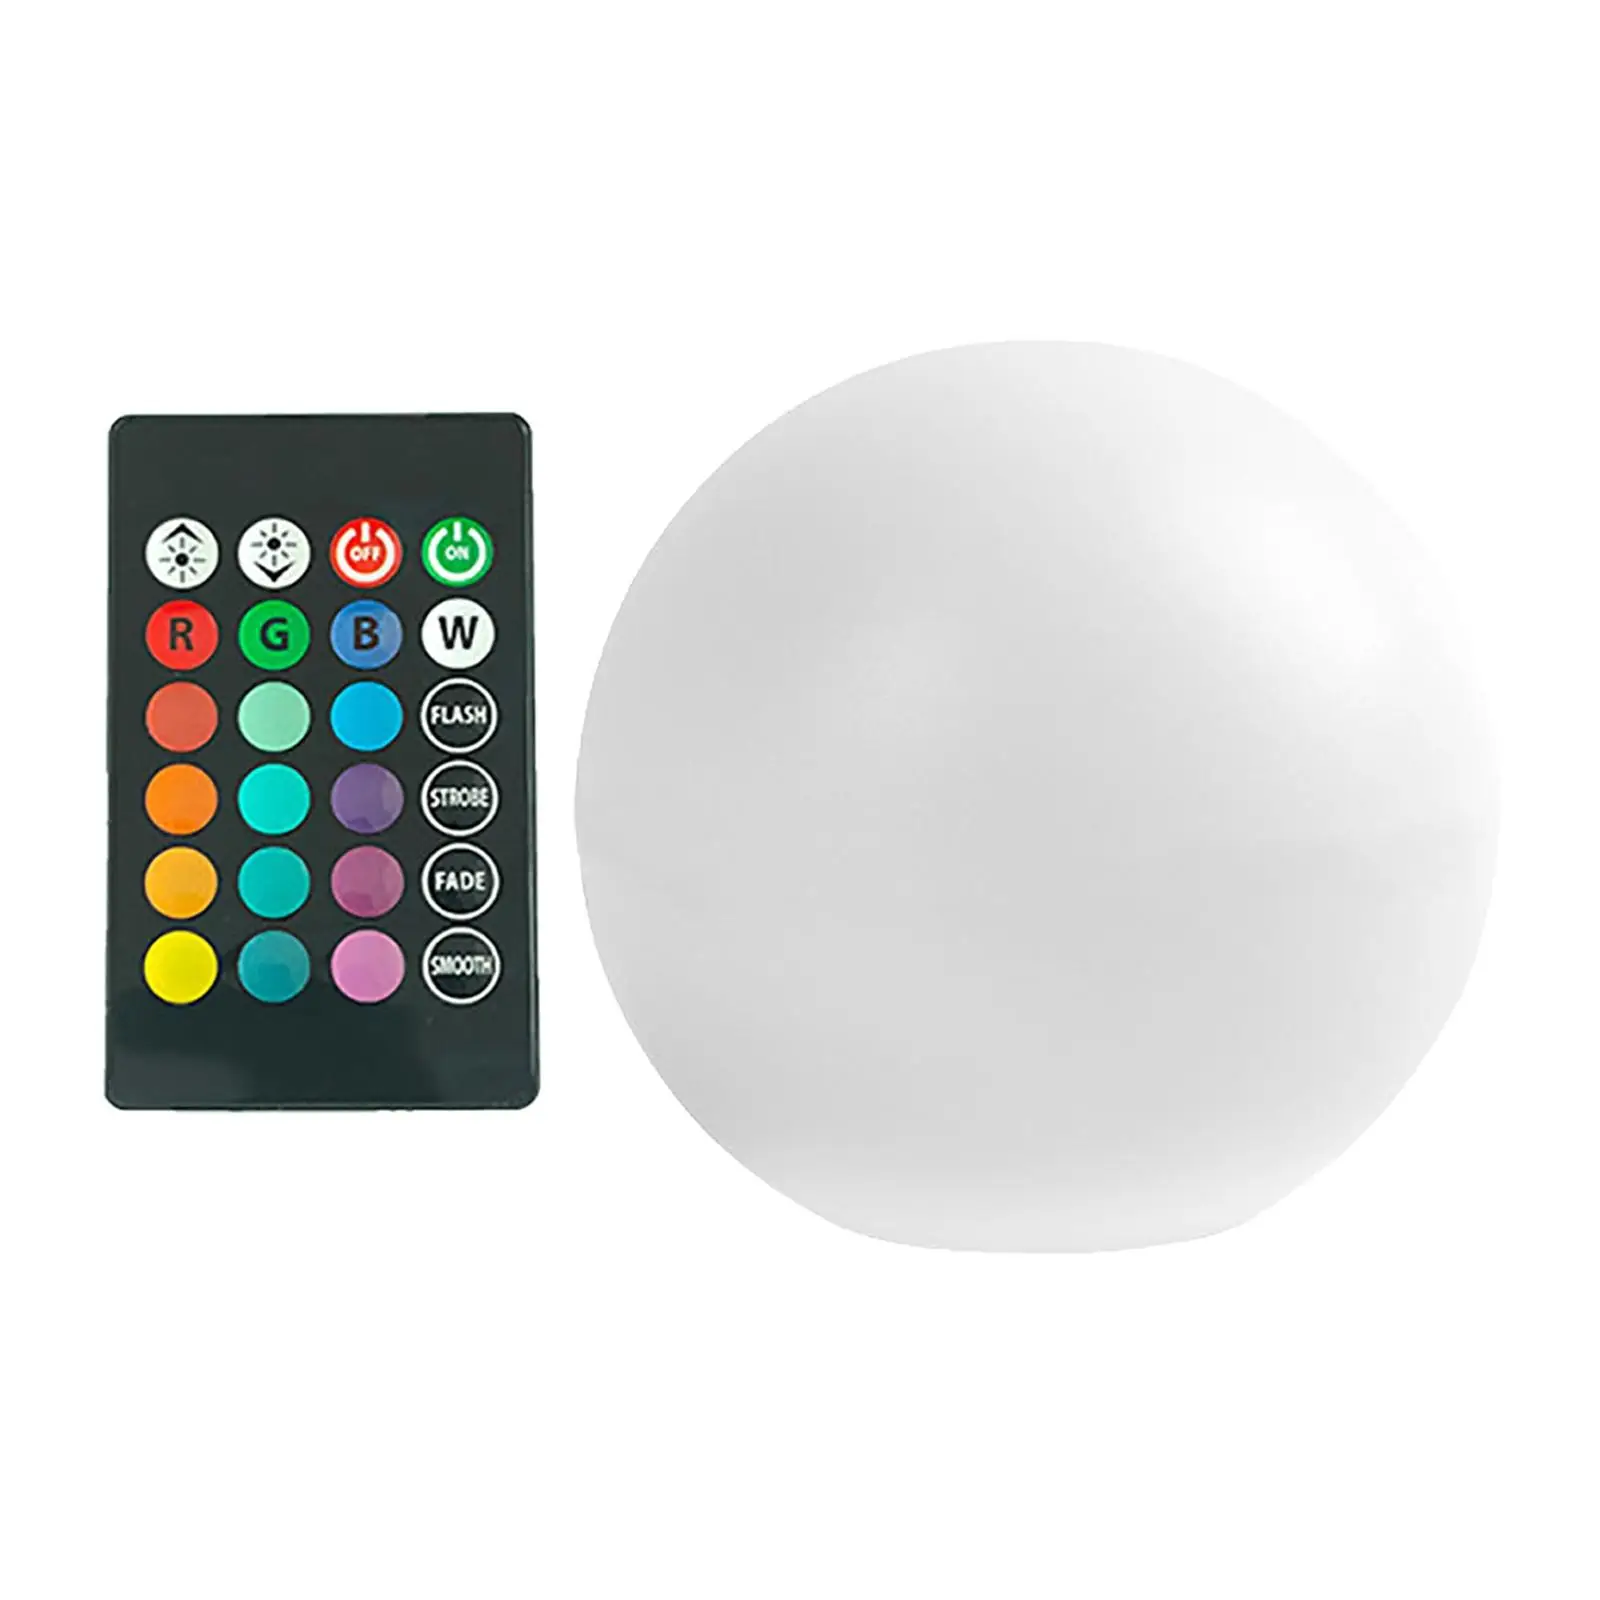 Waterproof Floating Pool Ball Light Kids Gift 16 Colors LED Light for Summer Beach Outdoor Garden Lawn Swimming Pool Decoration